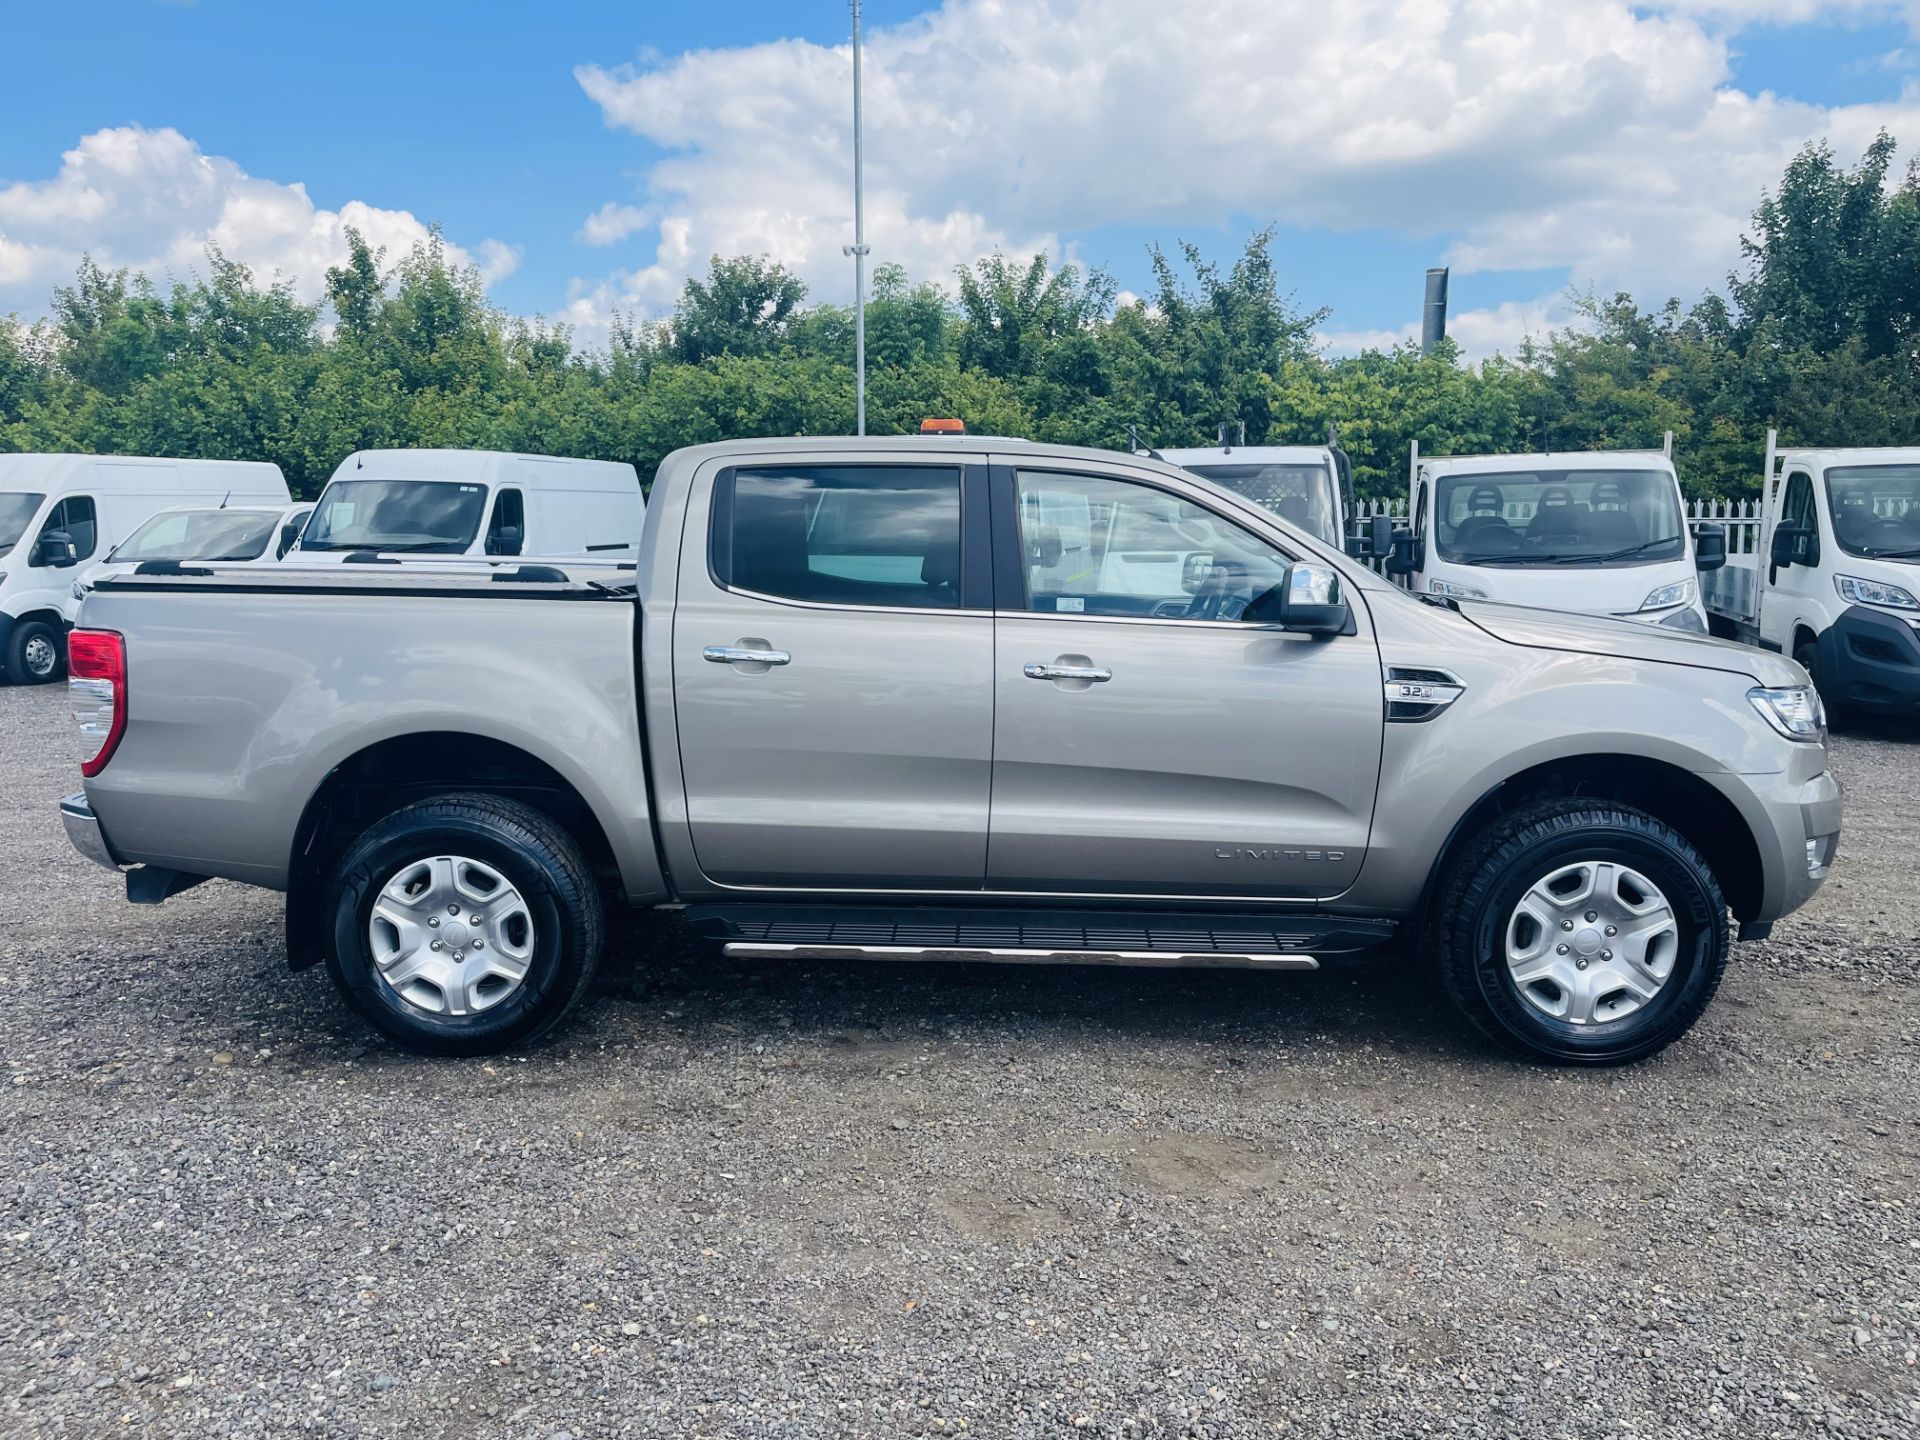 ** ON SALE ** Ford Ranger 3.2 TDCI Limited 2018 '68 Reg' Auto 4WD - Sat Nav - A/C - Euro 6 - Image 14 of 35